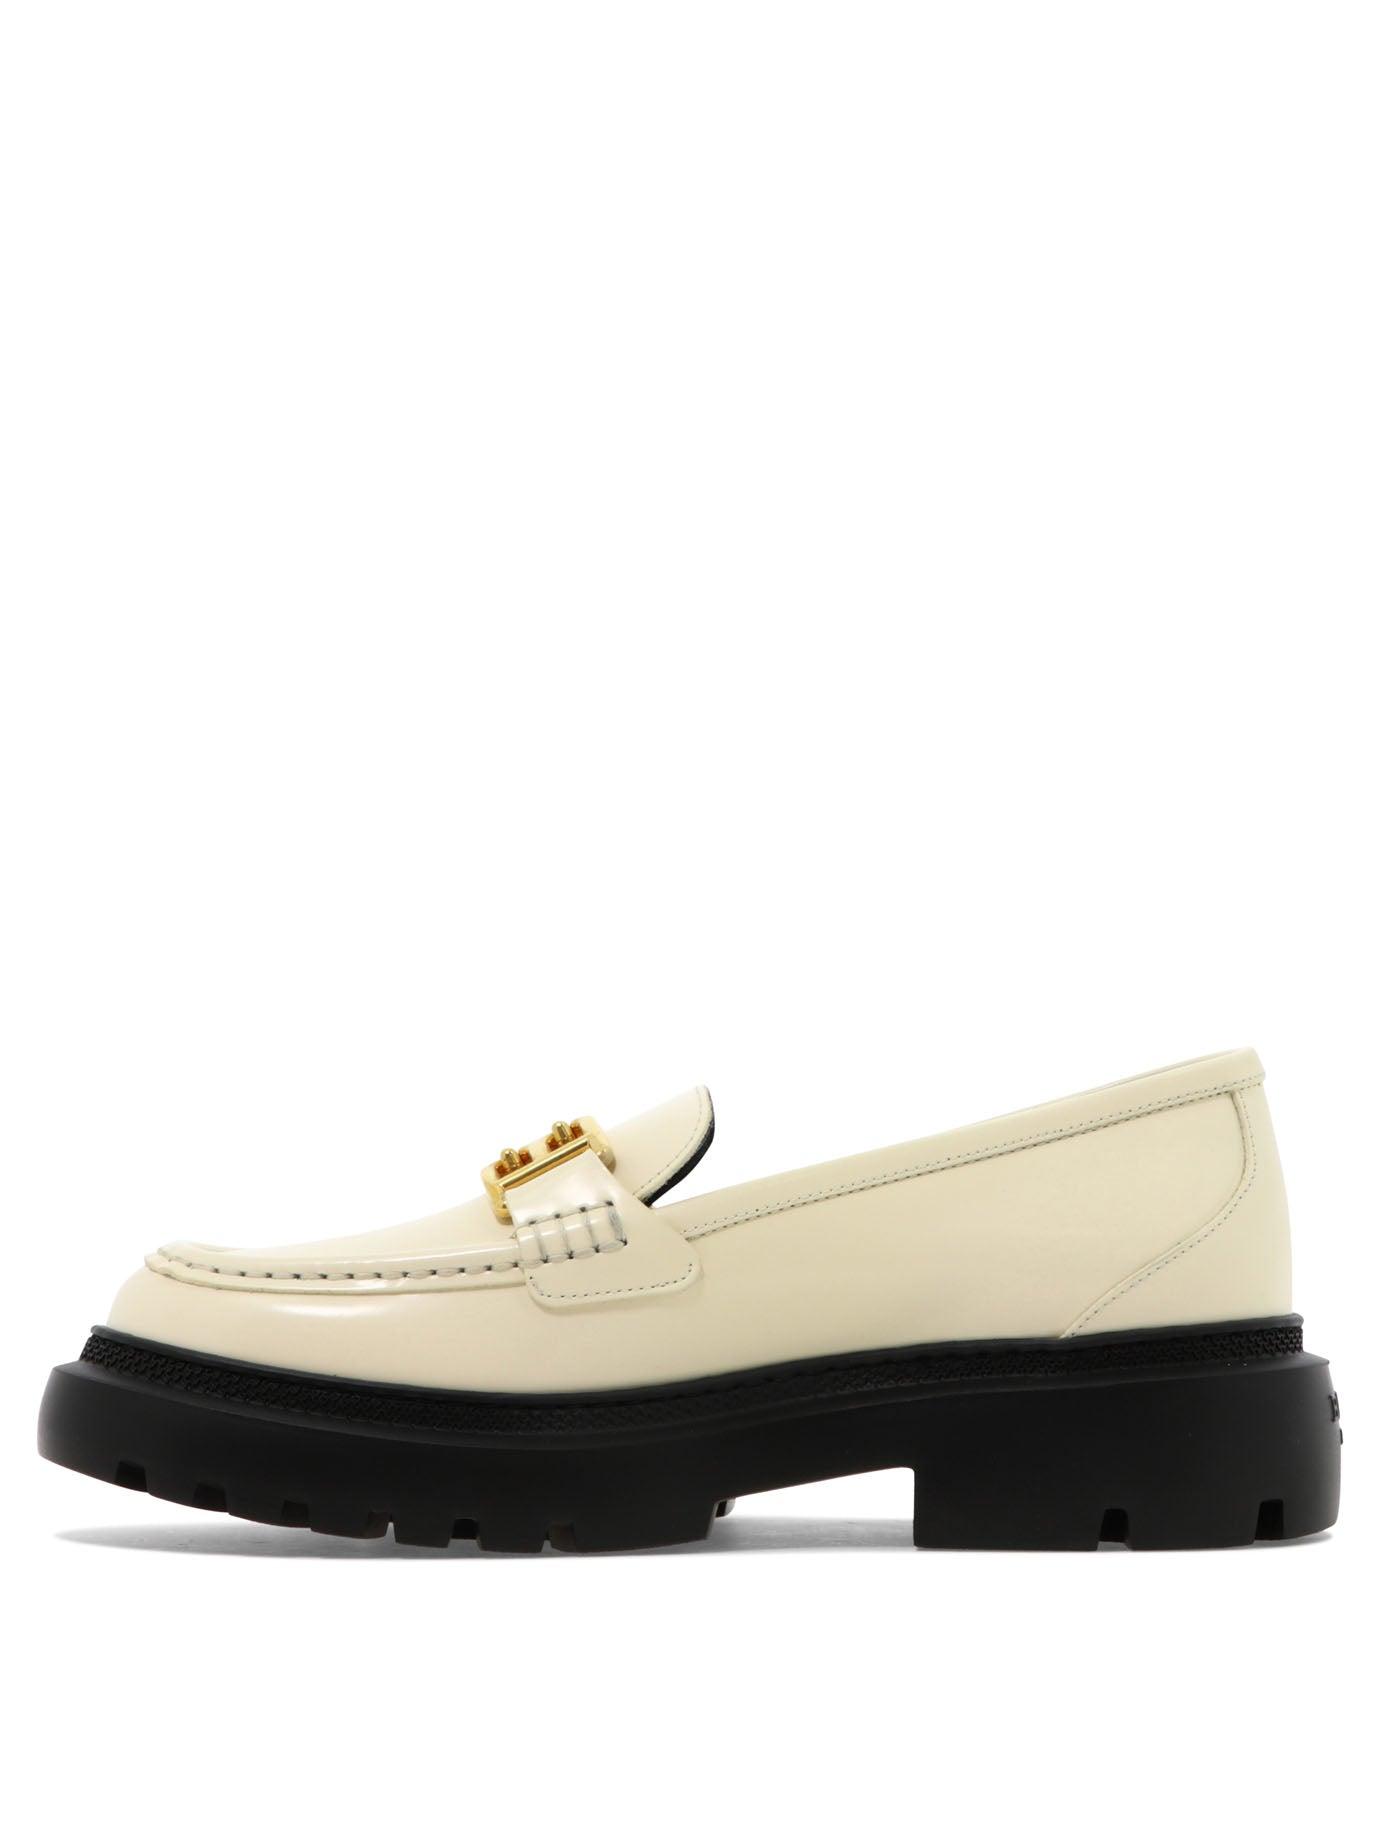 Bally Leather Gioia Loafers in White Black Womens Shoes Flats and flat shoes Loafers and moccasins 